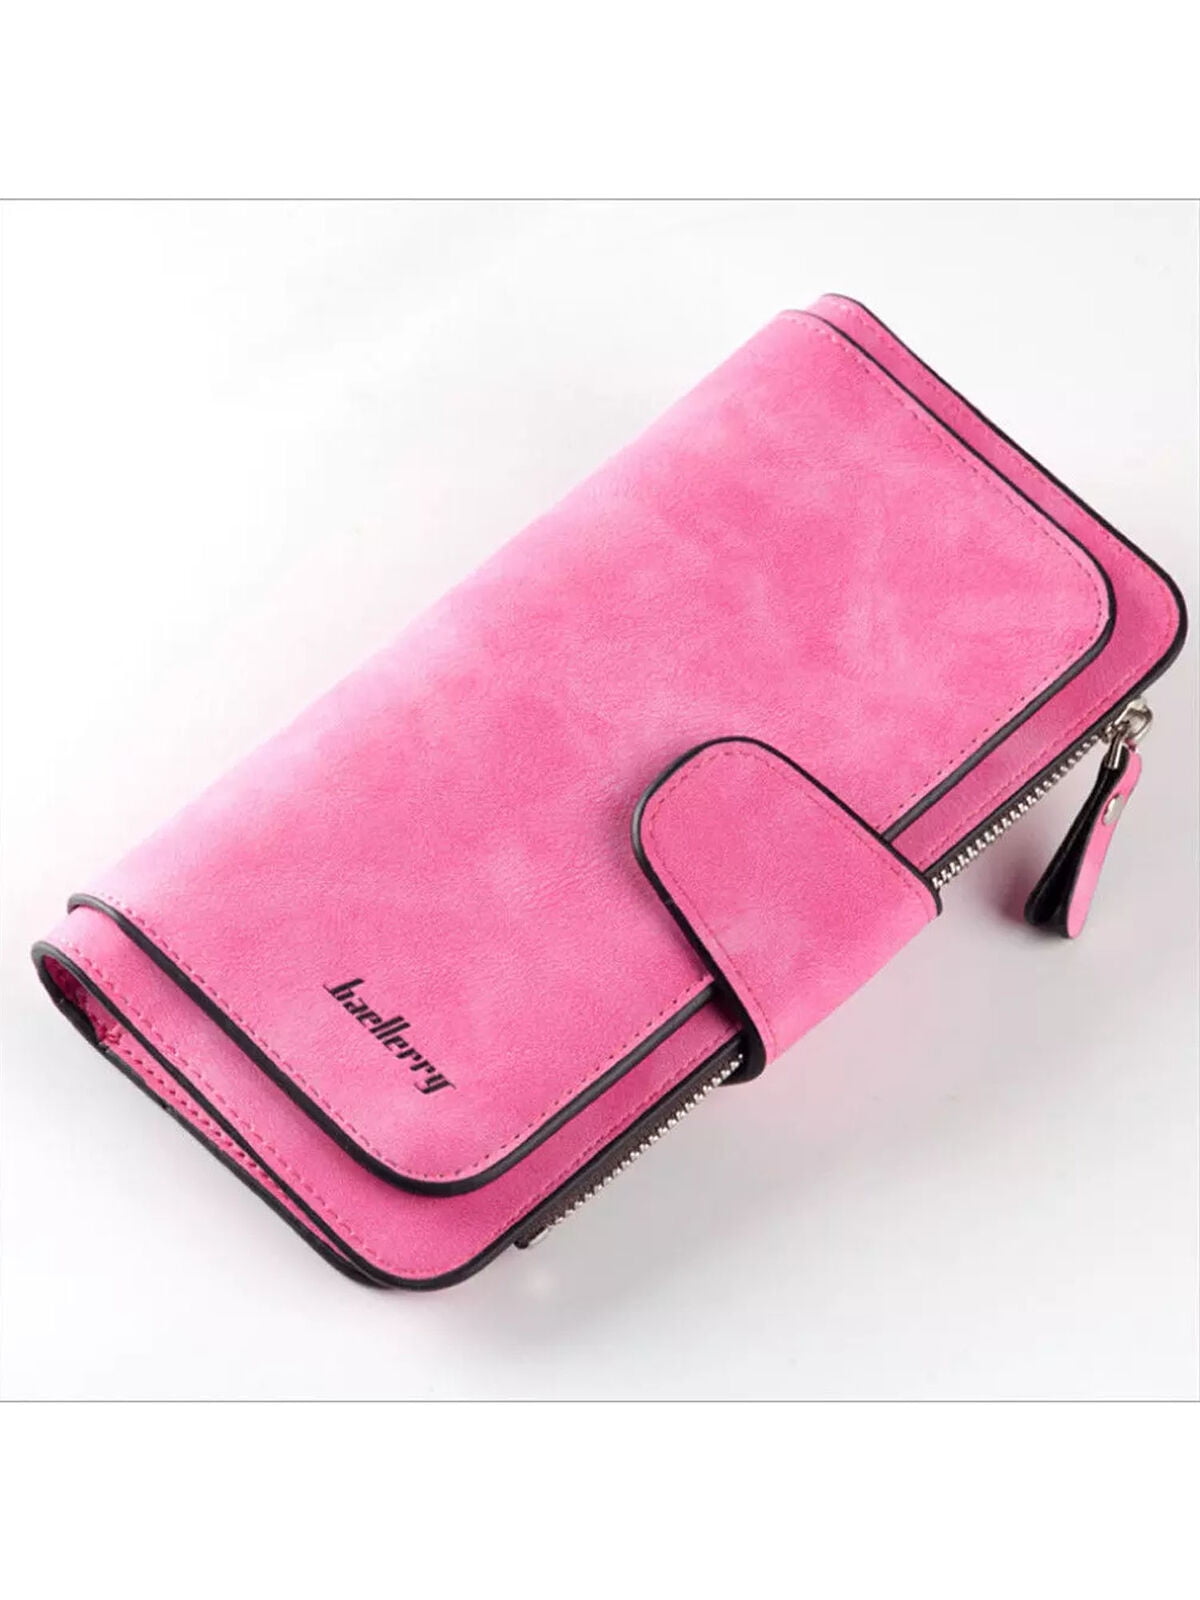 LADIES WOMENS DESIGNER STYLE  PU WALLETS PURSES MOBILE COINS CARDS HOLDERS NEW